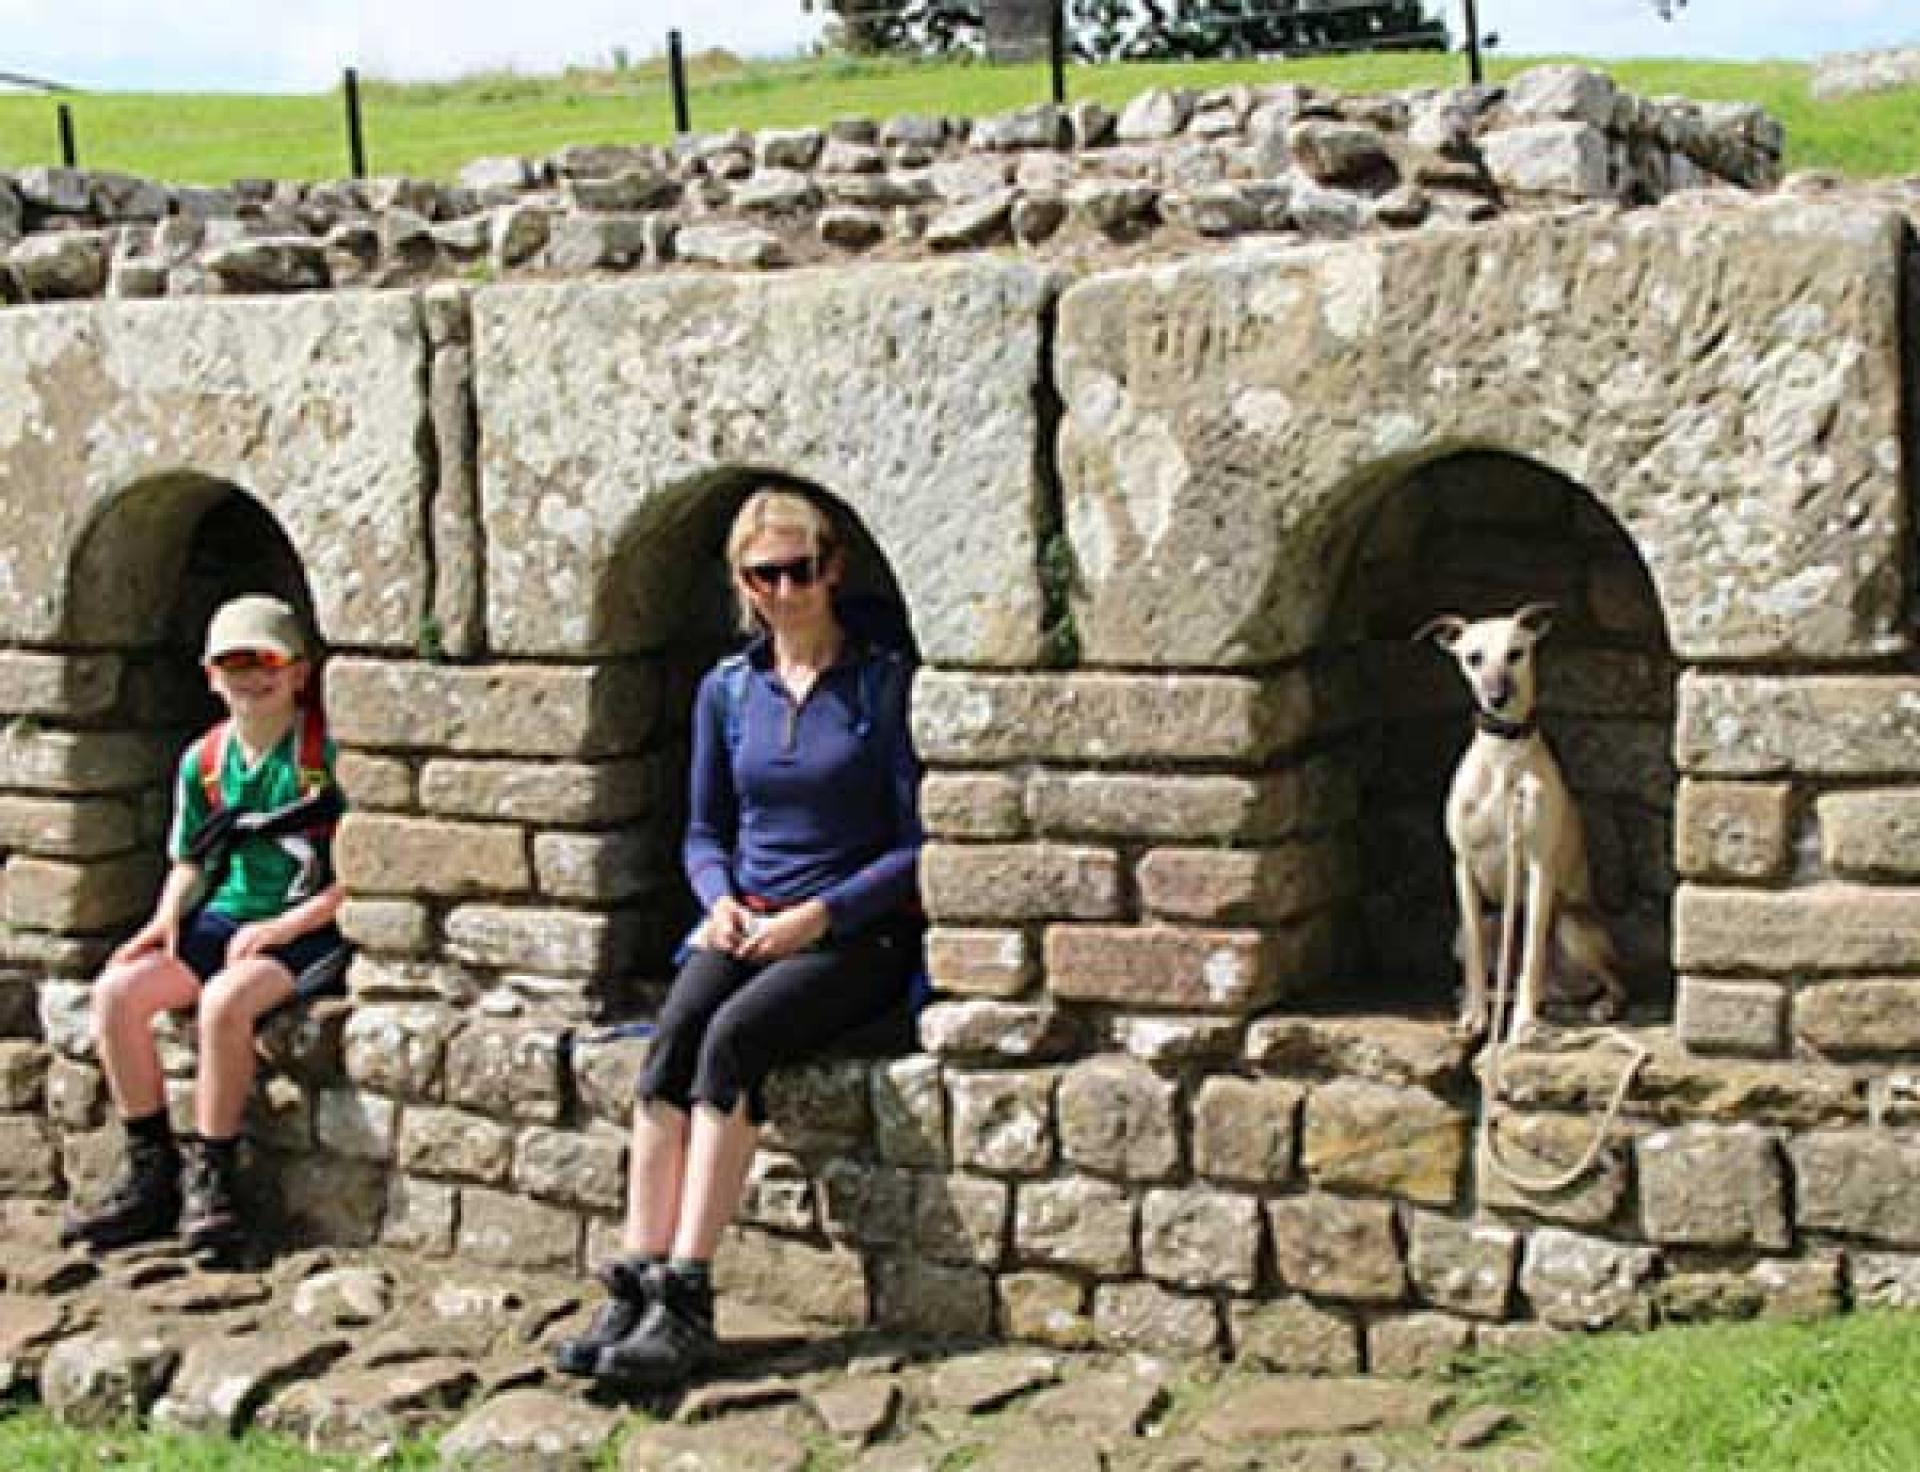 Dog and family sit in Roman ruins along Hadrian's Wall Path